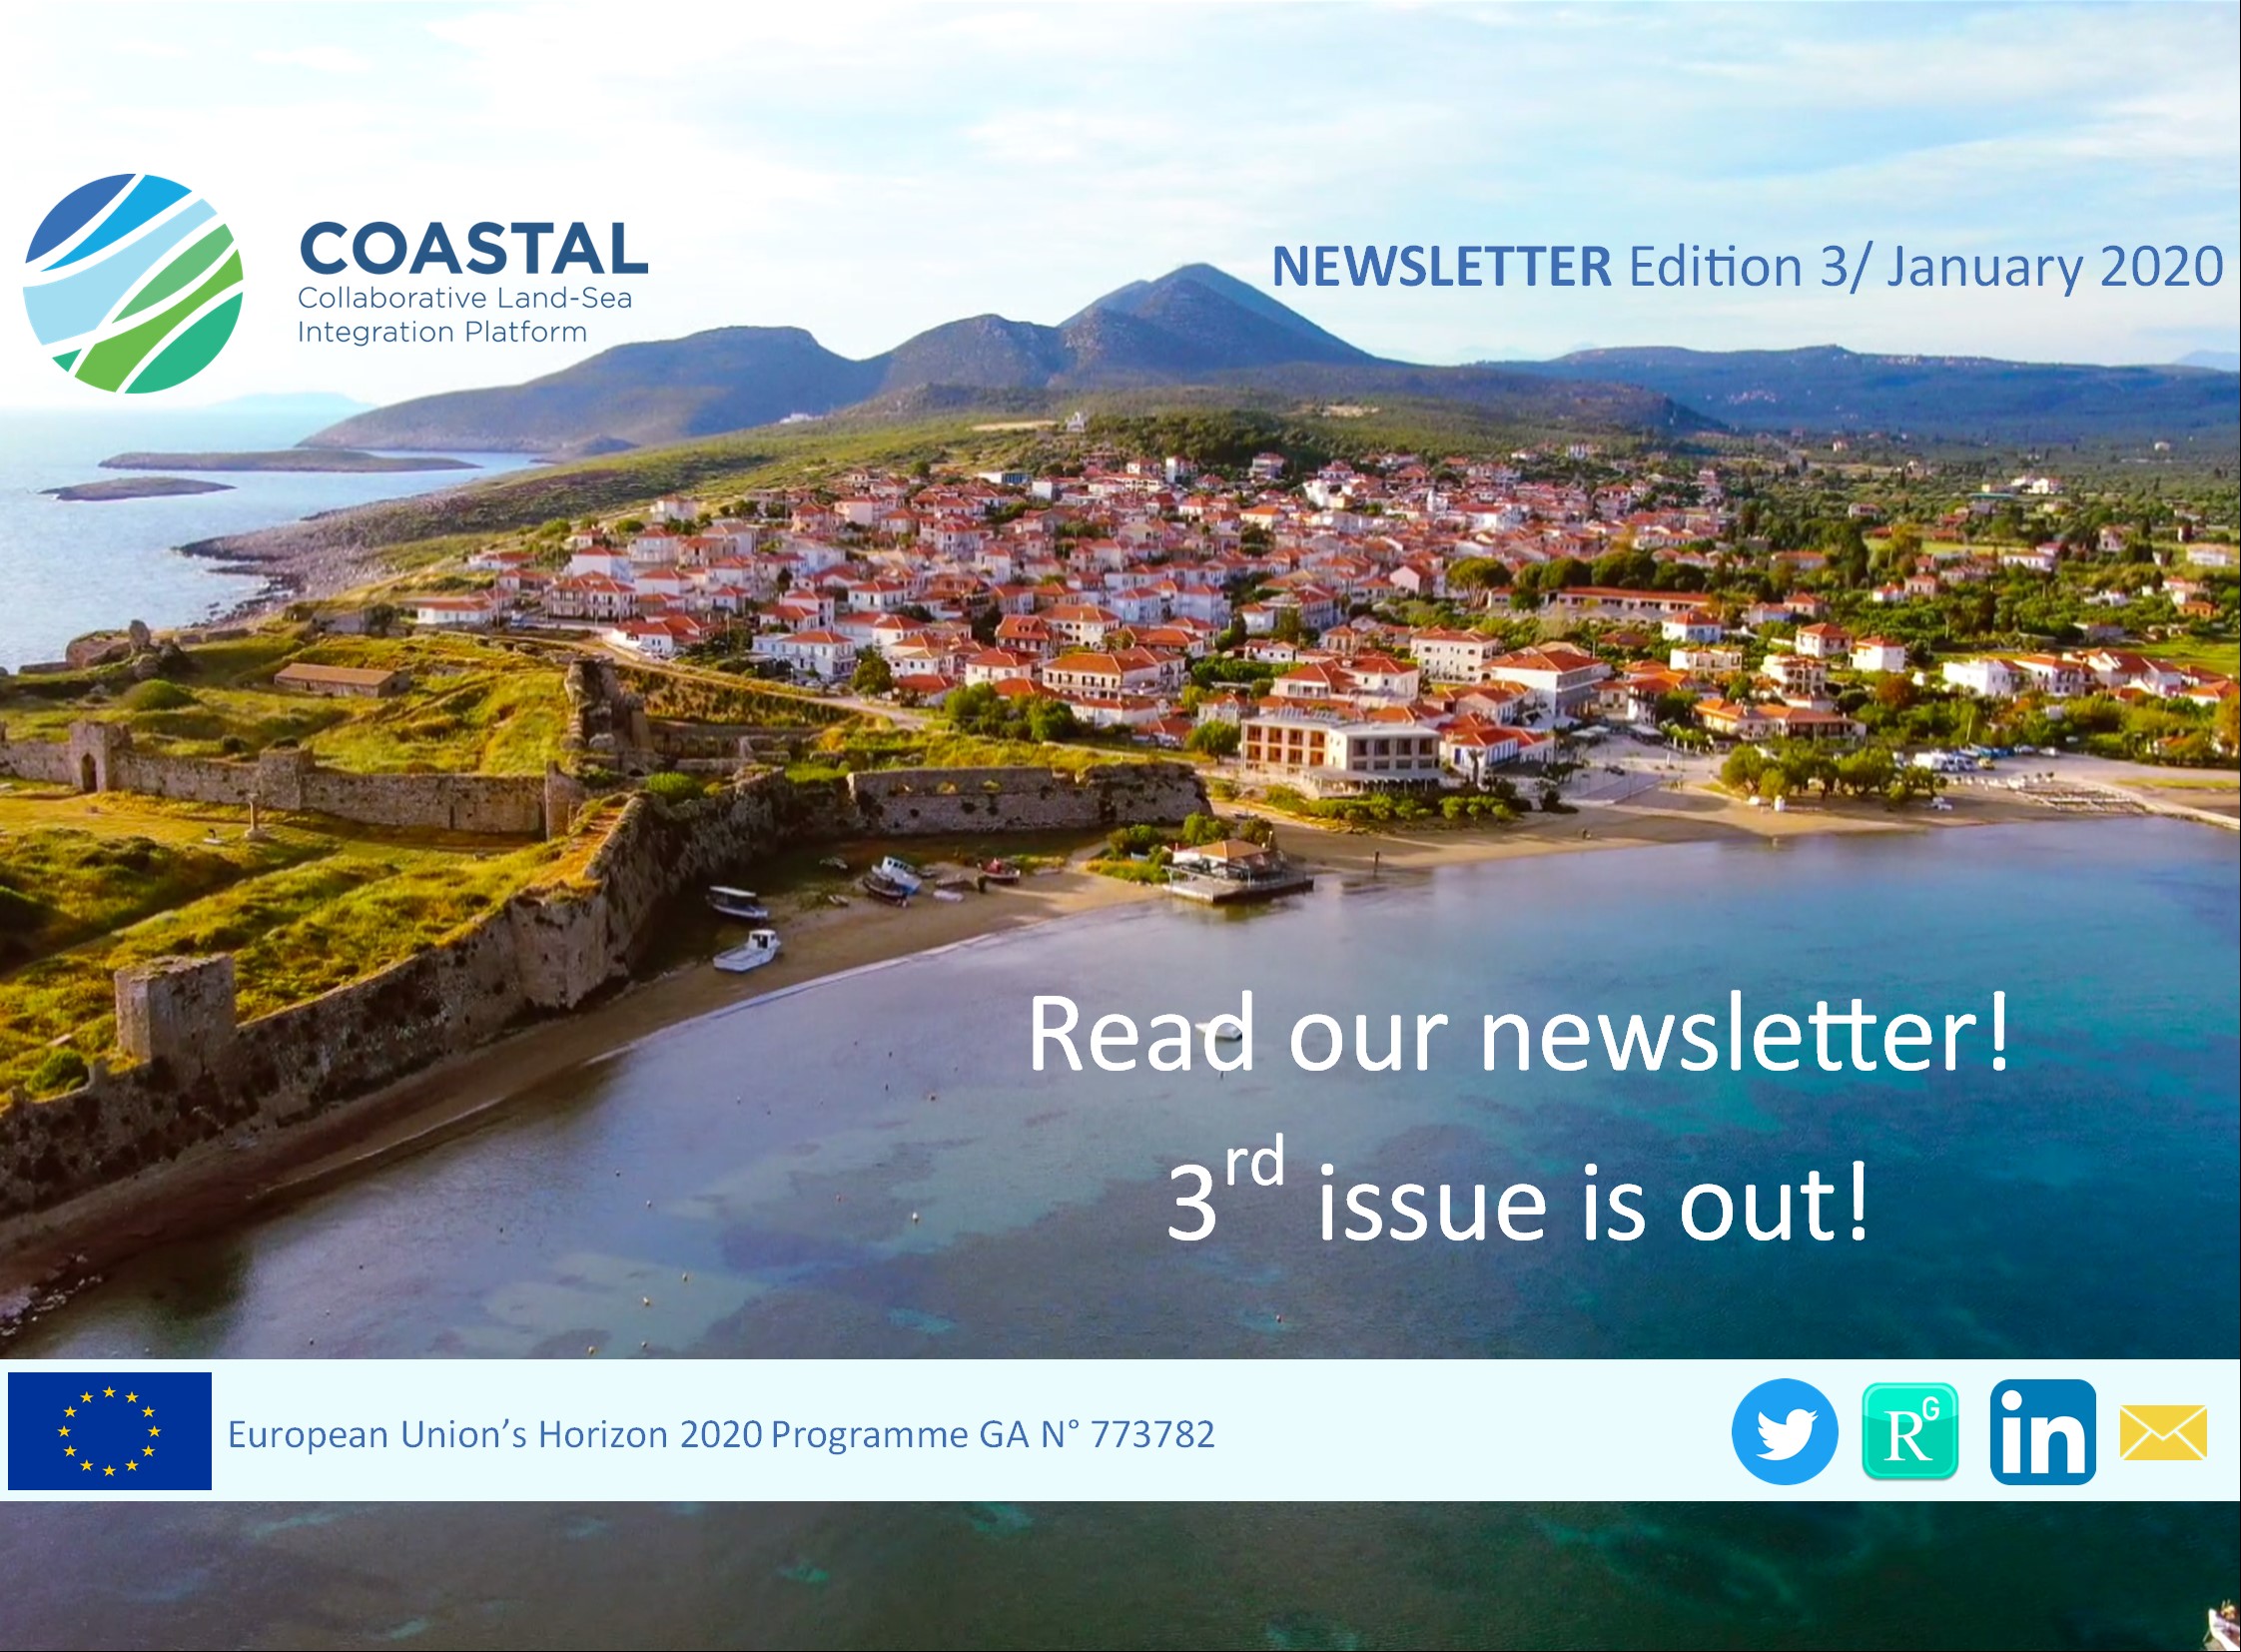 COASTAL's 3rd Newsletter is out!